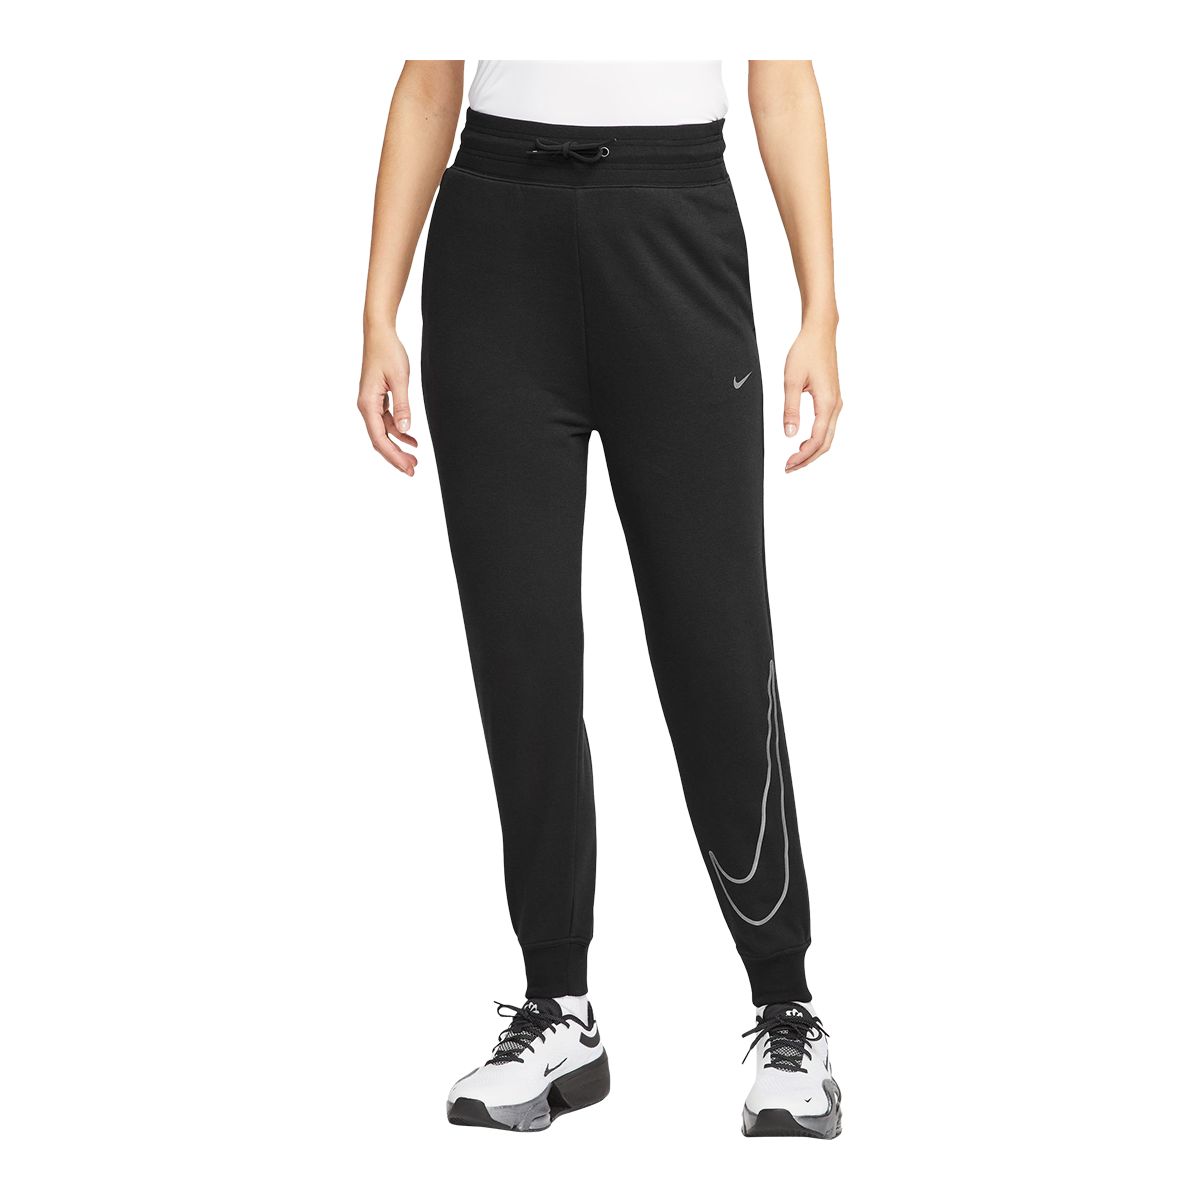 Green Bay Packers Womens Nike Dri-Fit Legging at the Packers Pro Shop